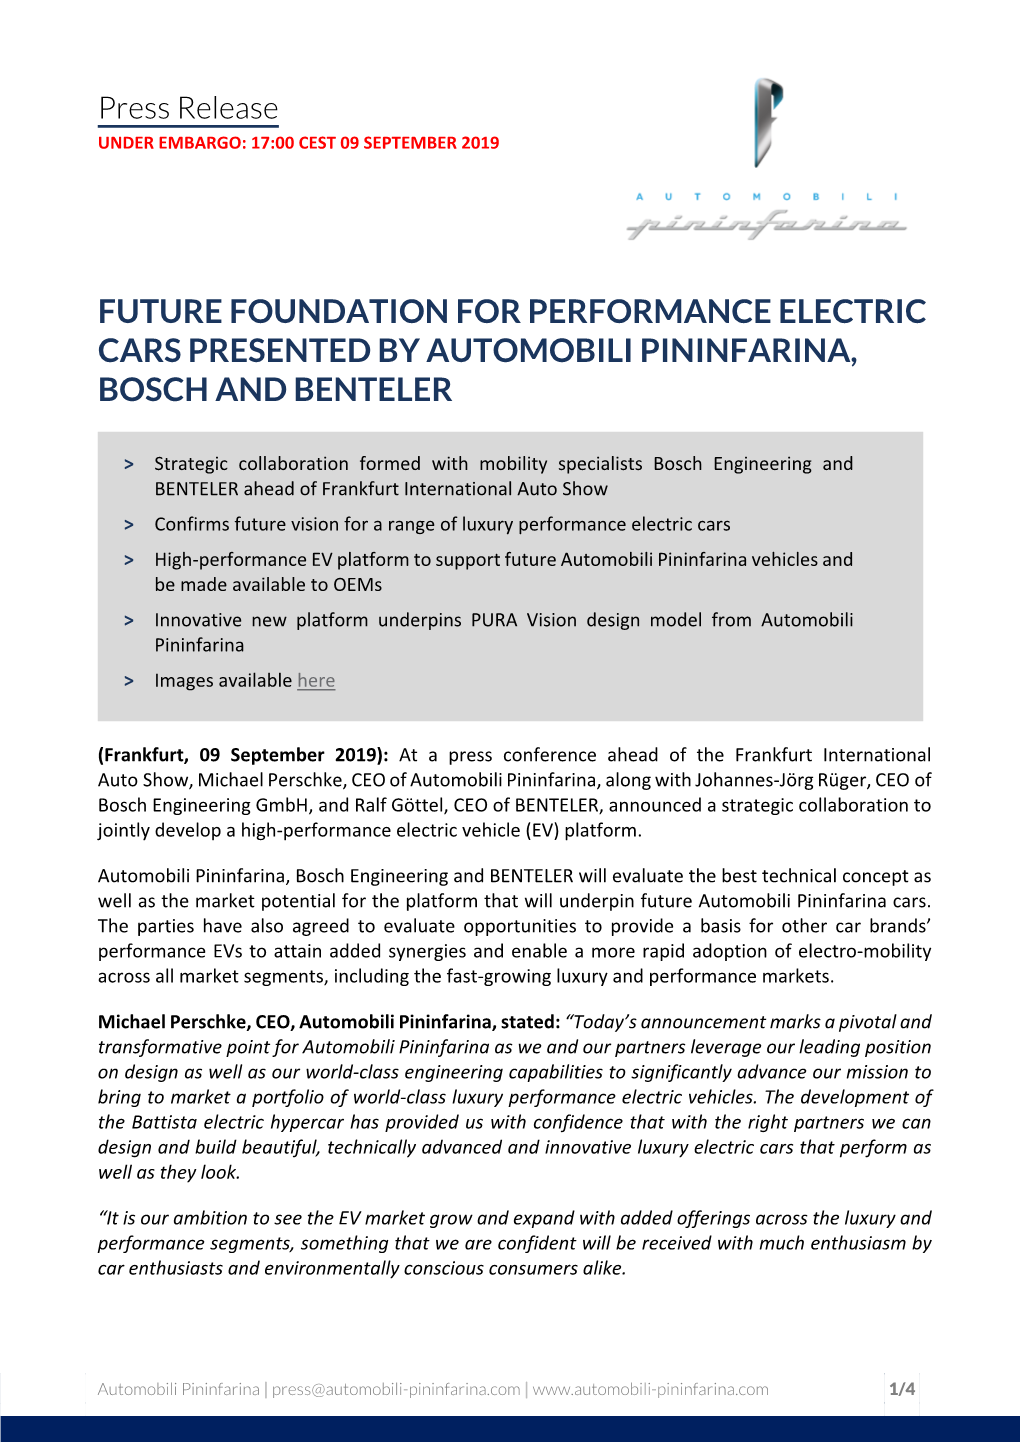 Future Foundation for Performance Electric Cars Presented by Automobili Pininfarina, Bosch and Benteler